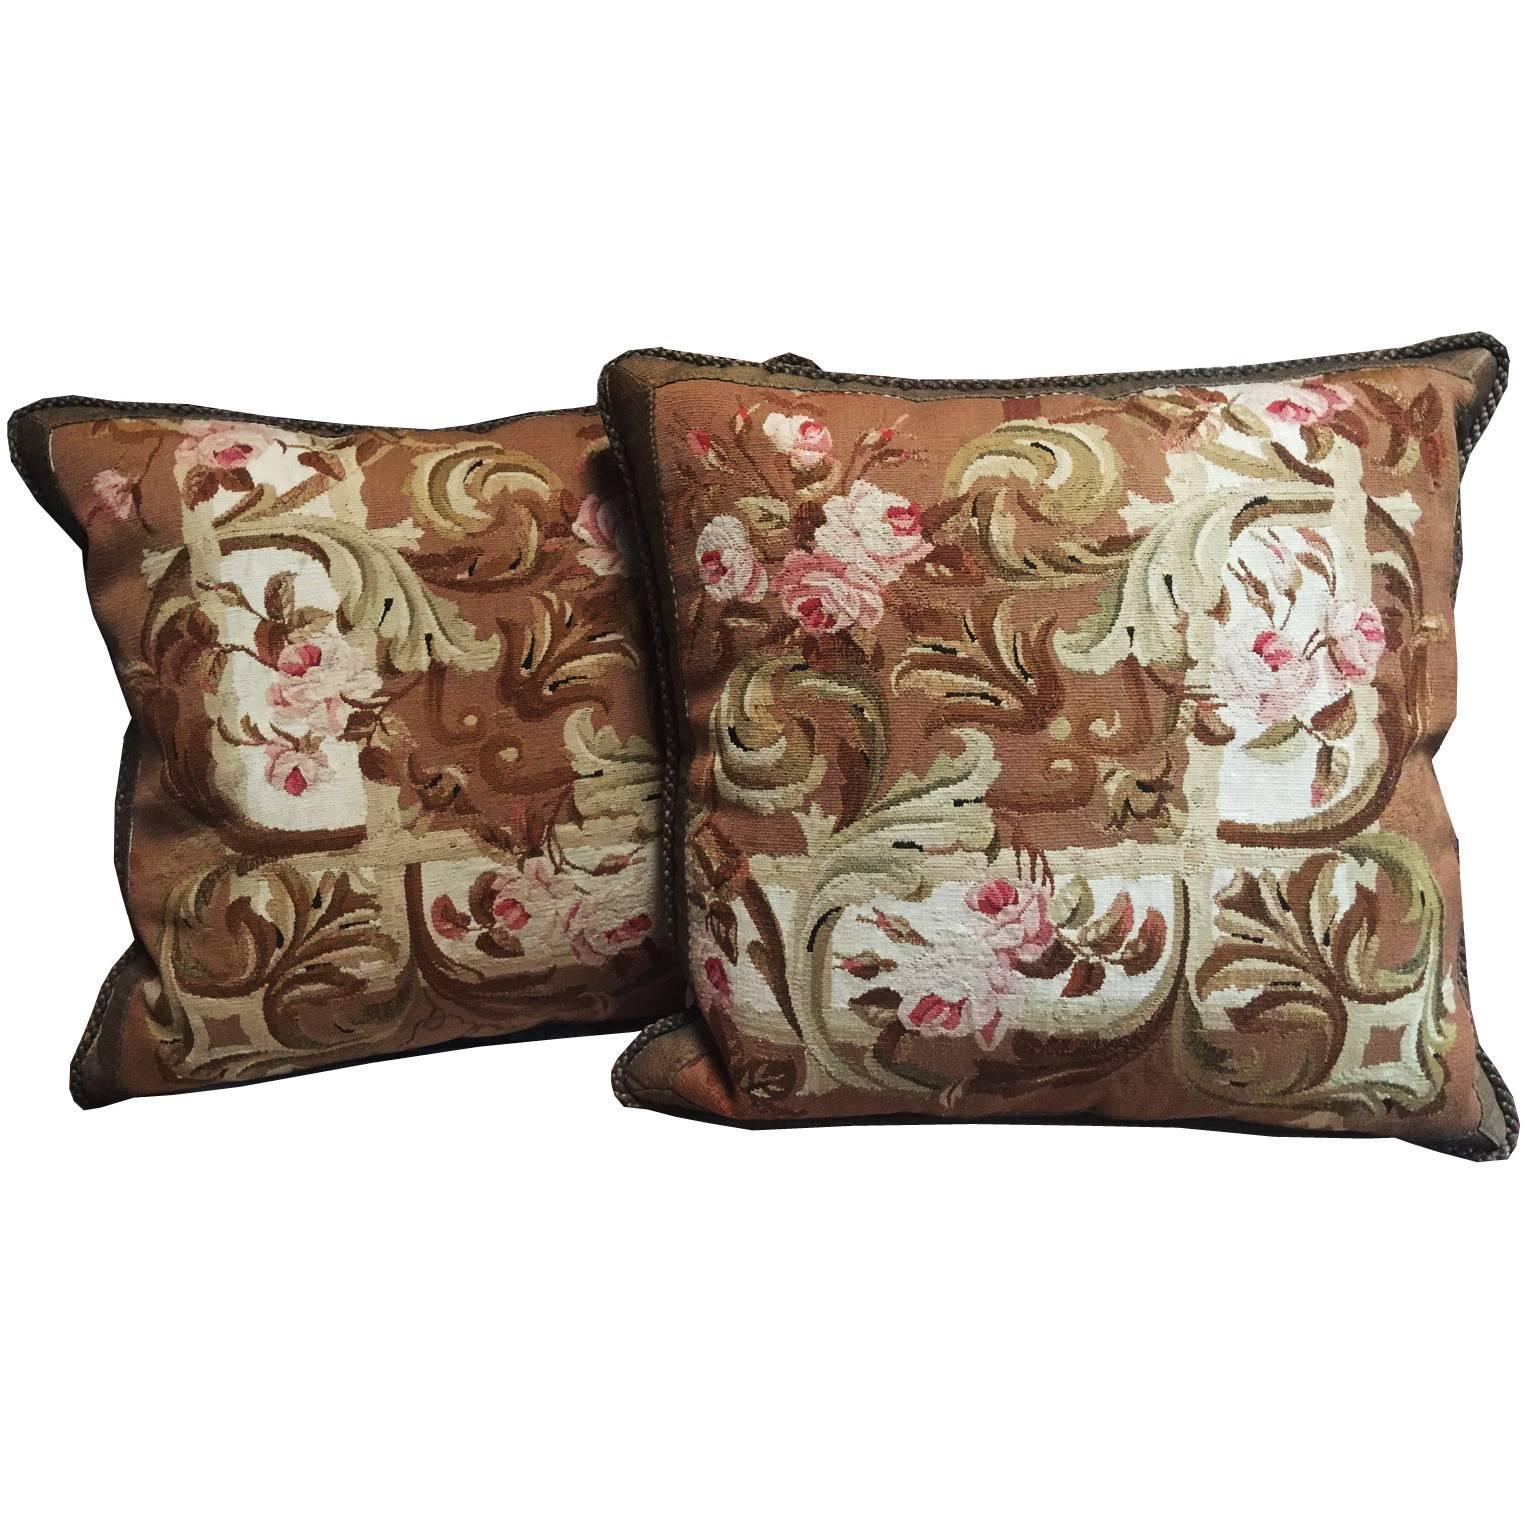 Pair of Antique French Aubusson Tapestry Pillows, circa 1860 For Sale